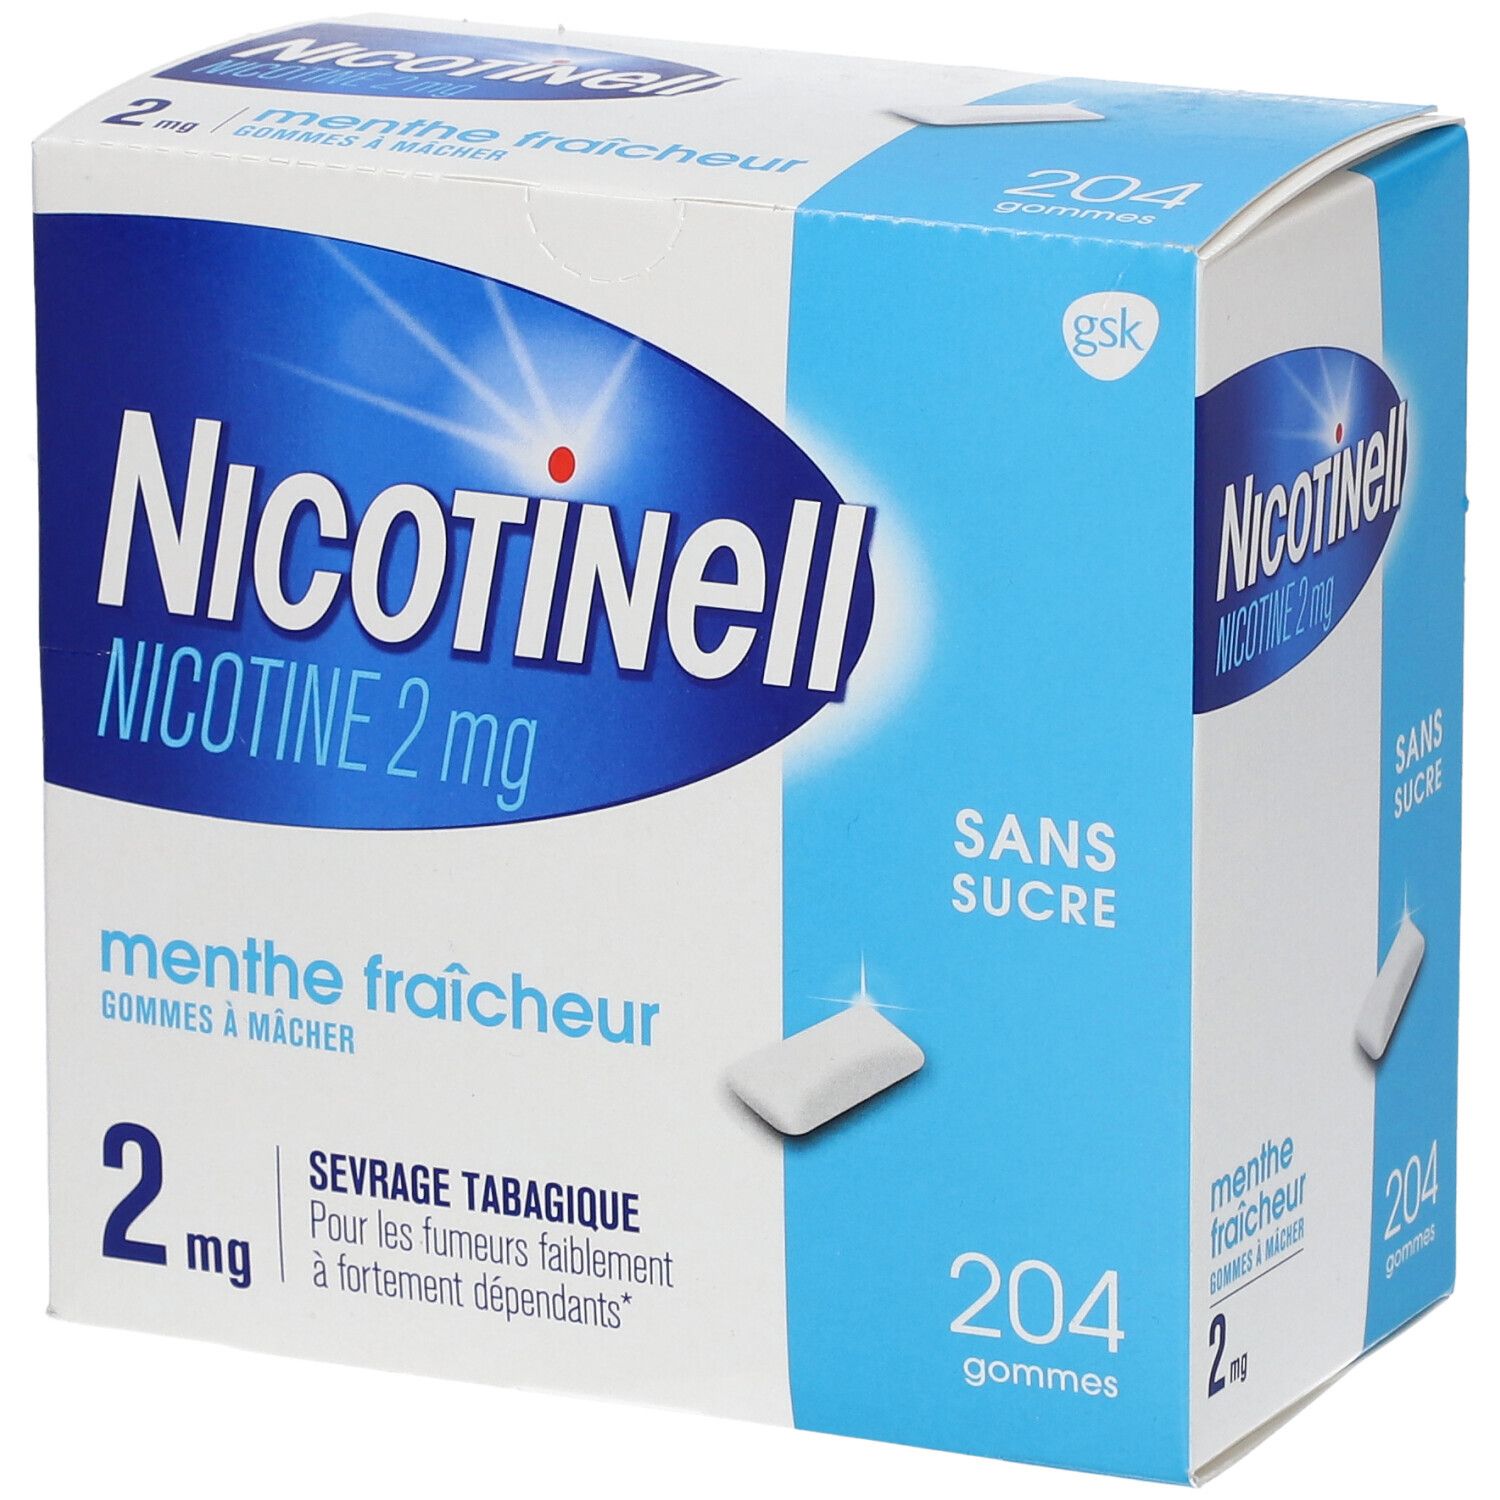 Nicotinell® Menthe Fraicheur s/s 2 mg